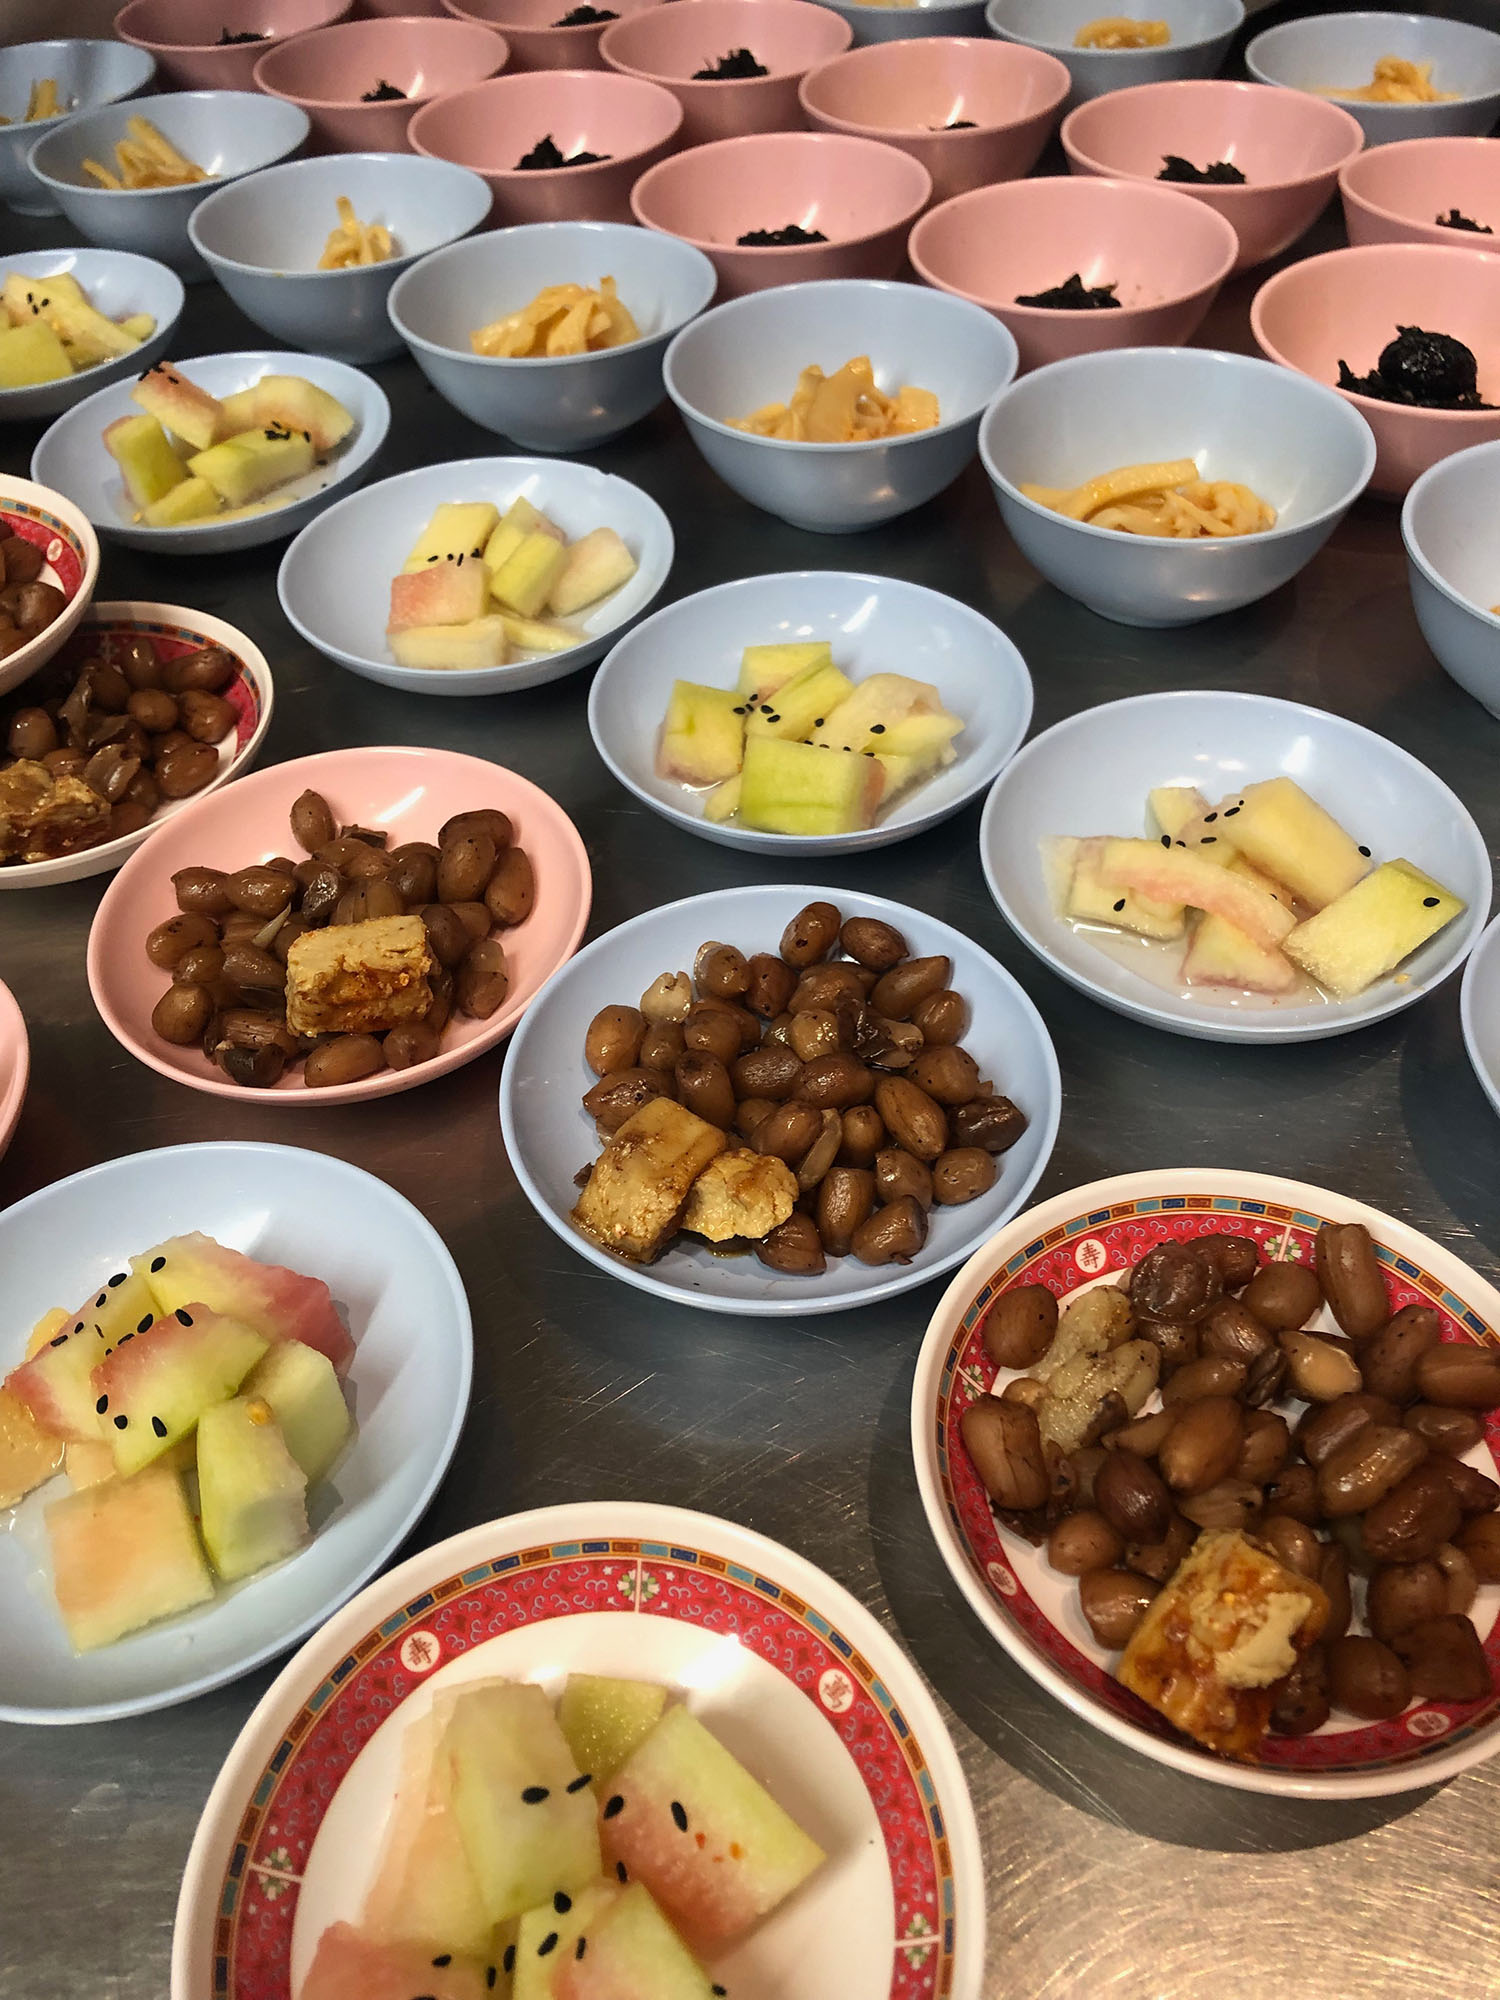 It is a photo from the Rice is Life pop-up on 19.05.2019 at The Pandanoodle.
Fruits and snacks are served on light blue and pink plates.